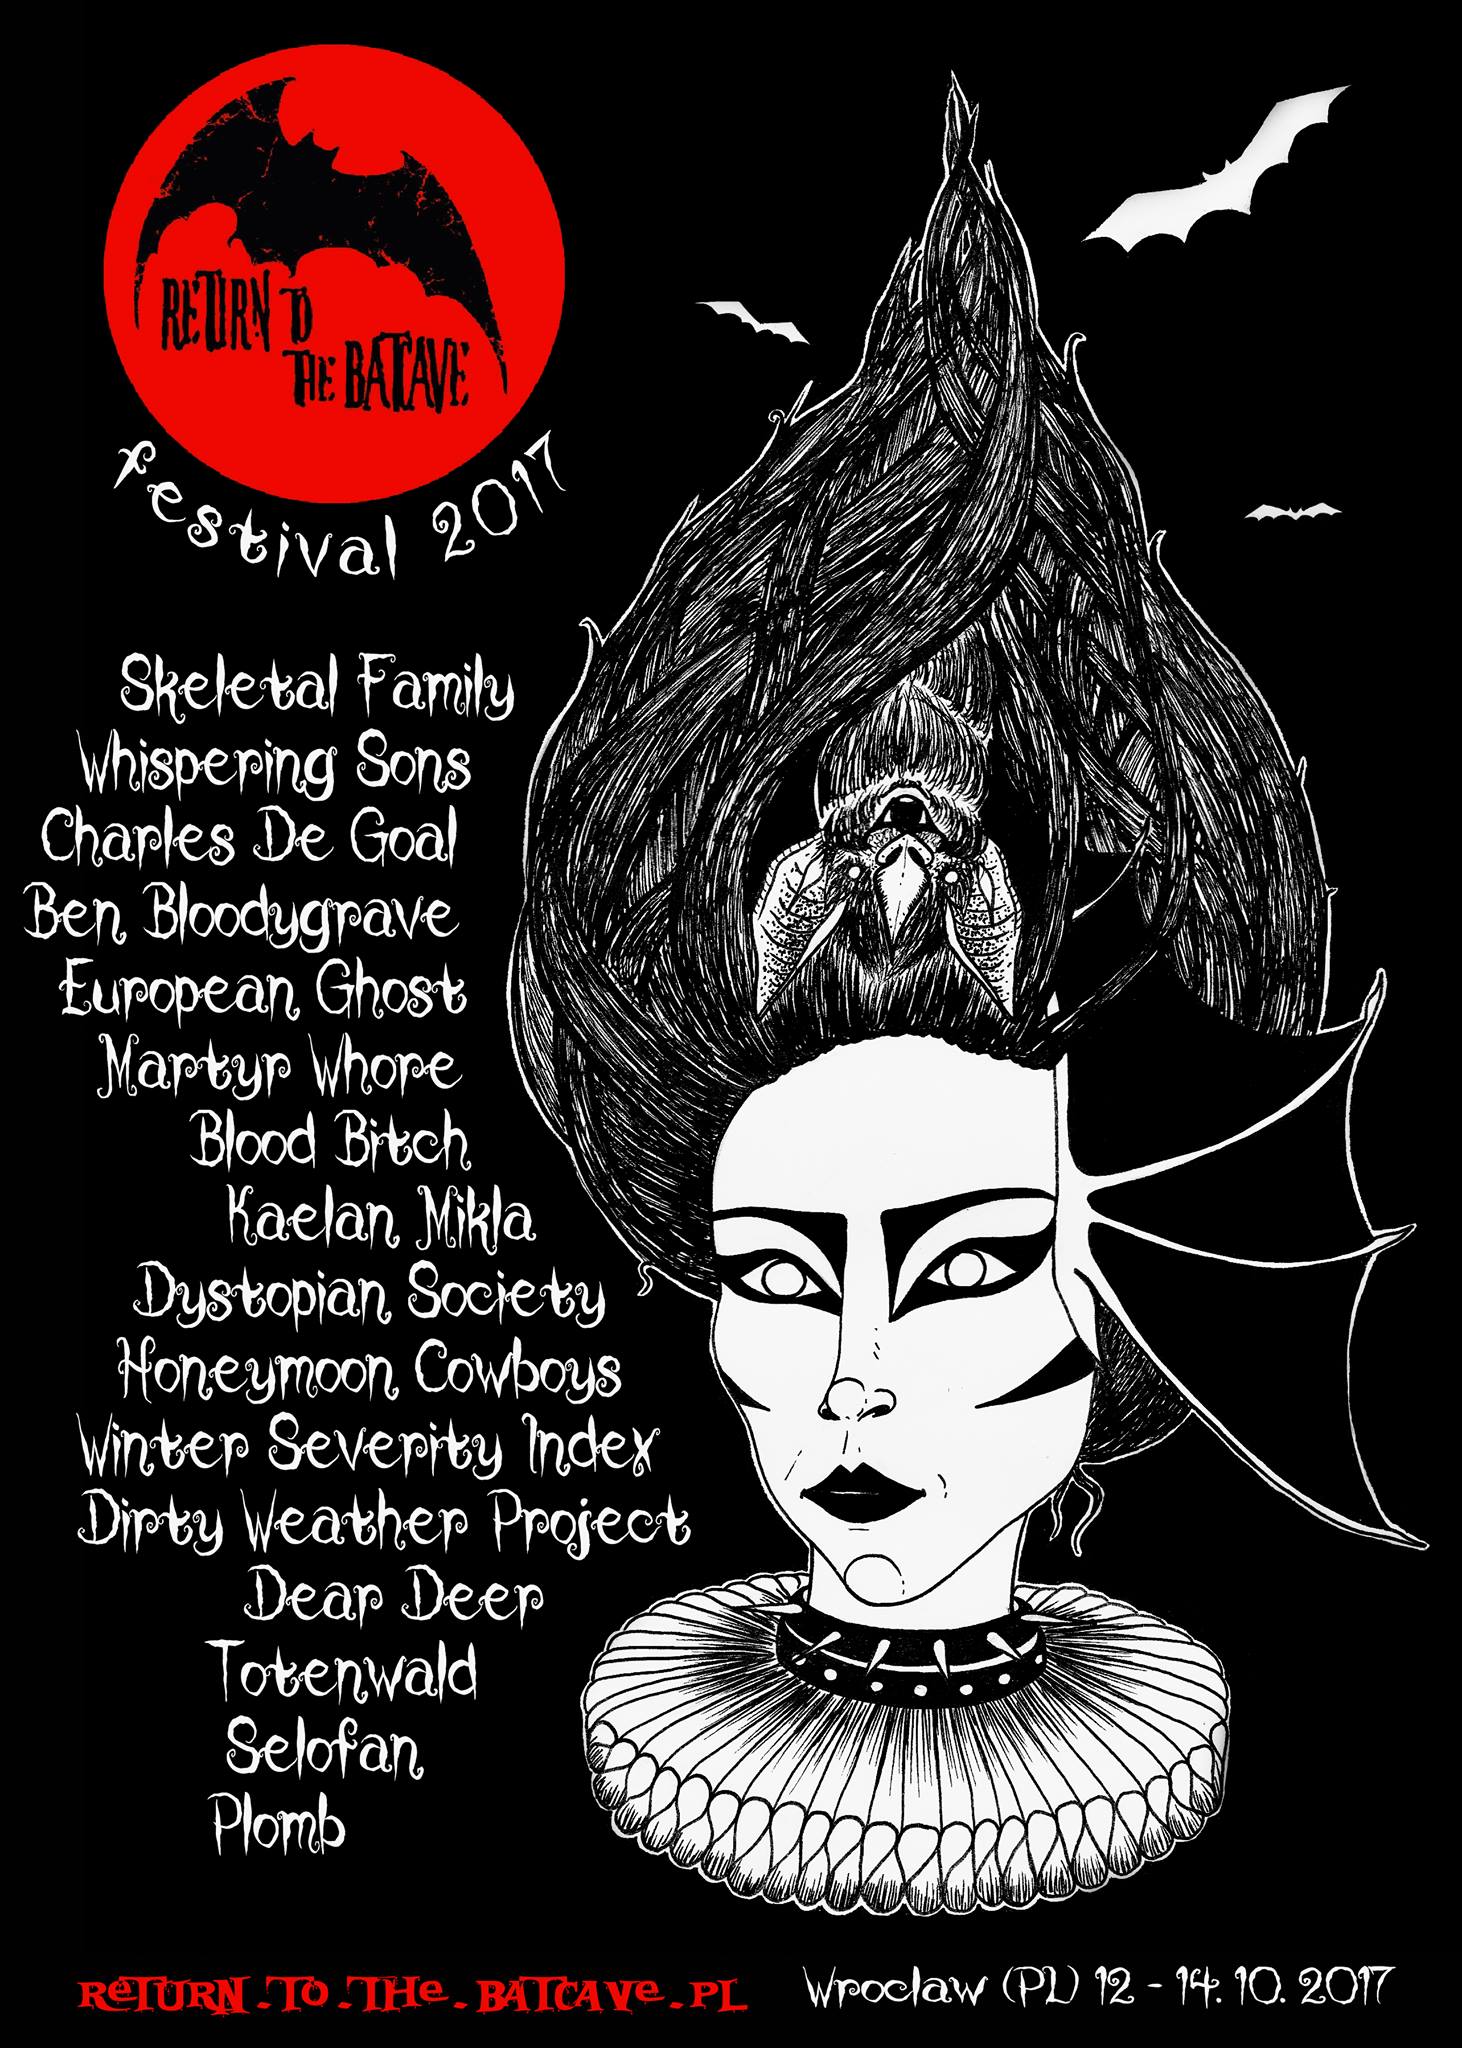 Return To The Batcave Festival 2017